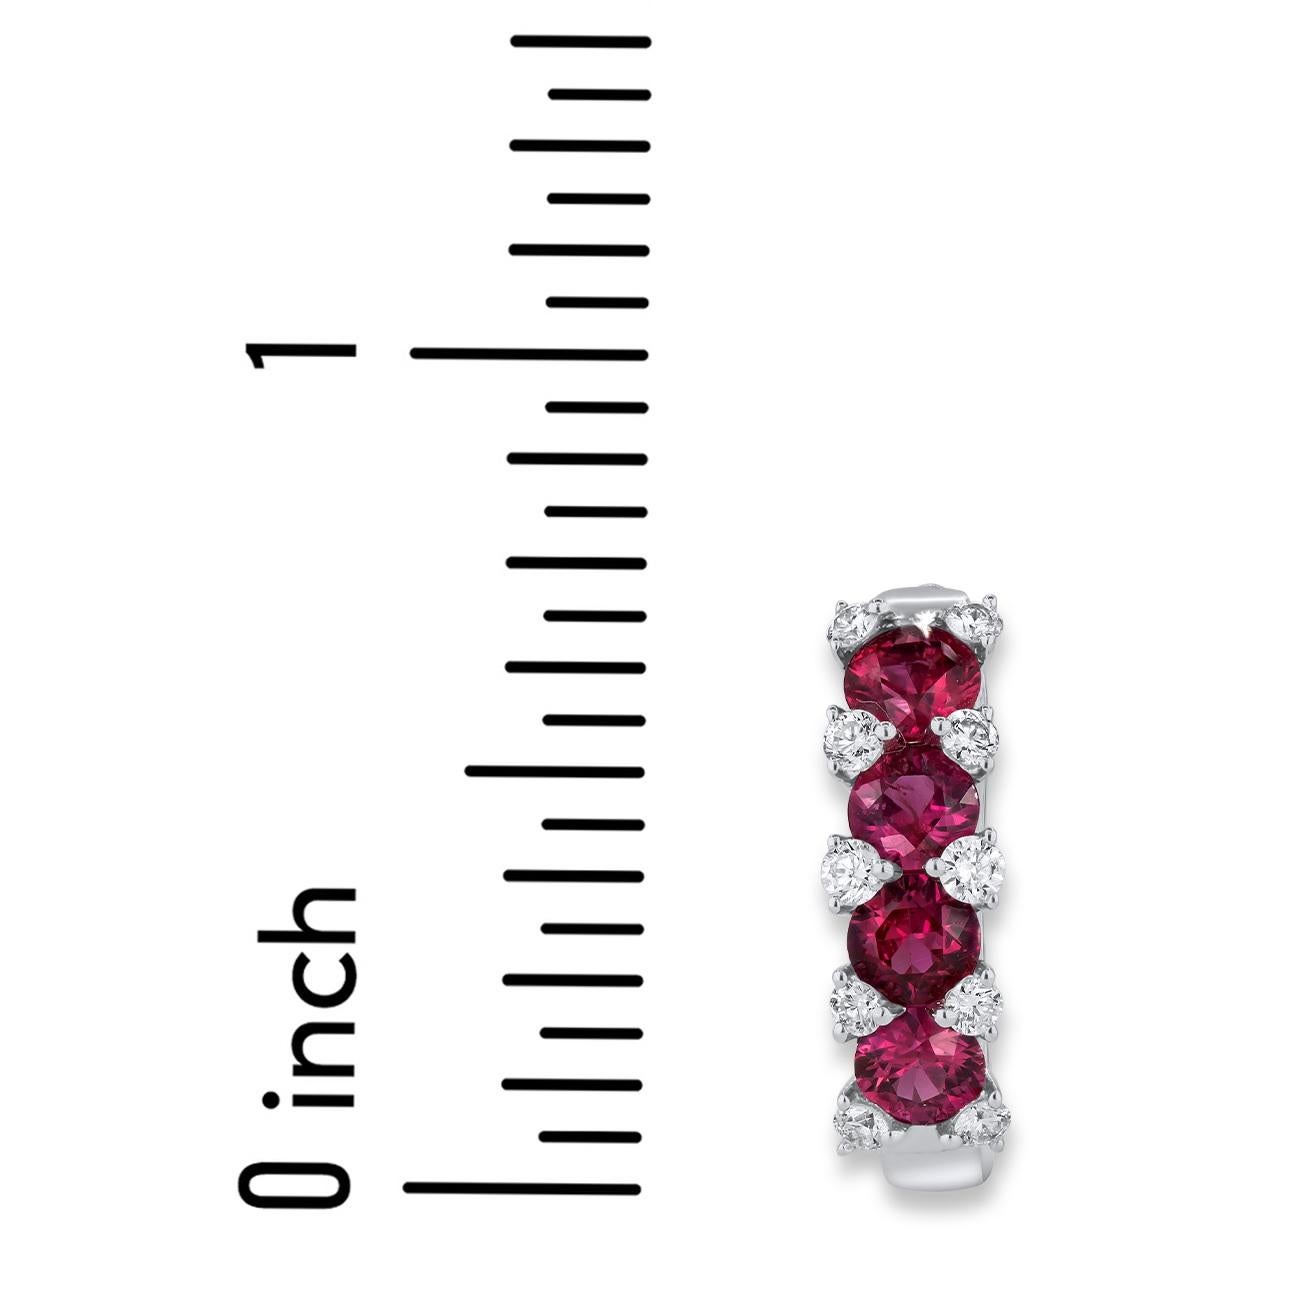 1.94 Carat Ruby and 0.41 Carat Diamond Hoop Earrings in 14k White Gold ref1916 In New Condition For Sale In New York, NY